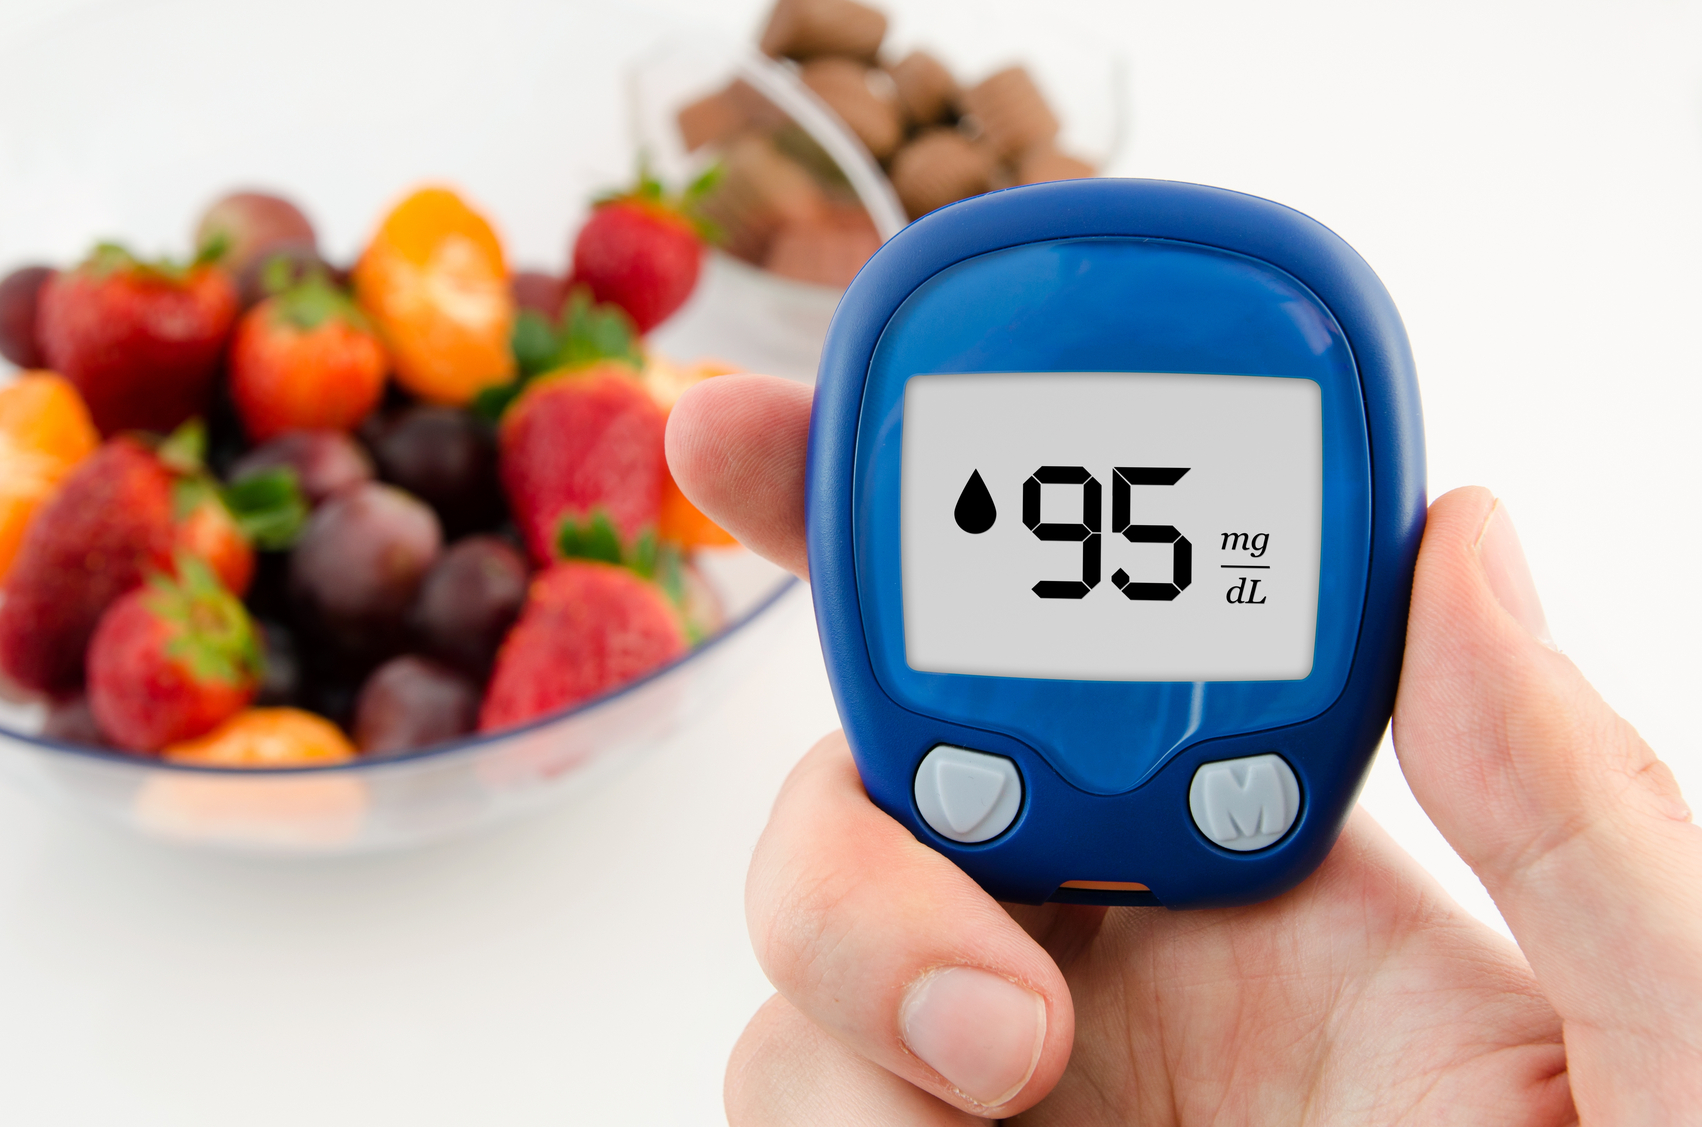 A proper diabetes diet helps to obtain better life quality